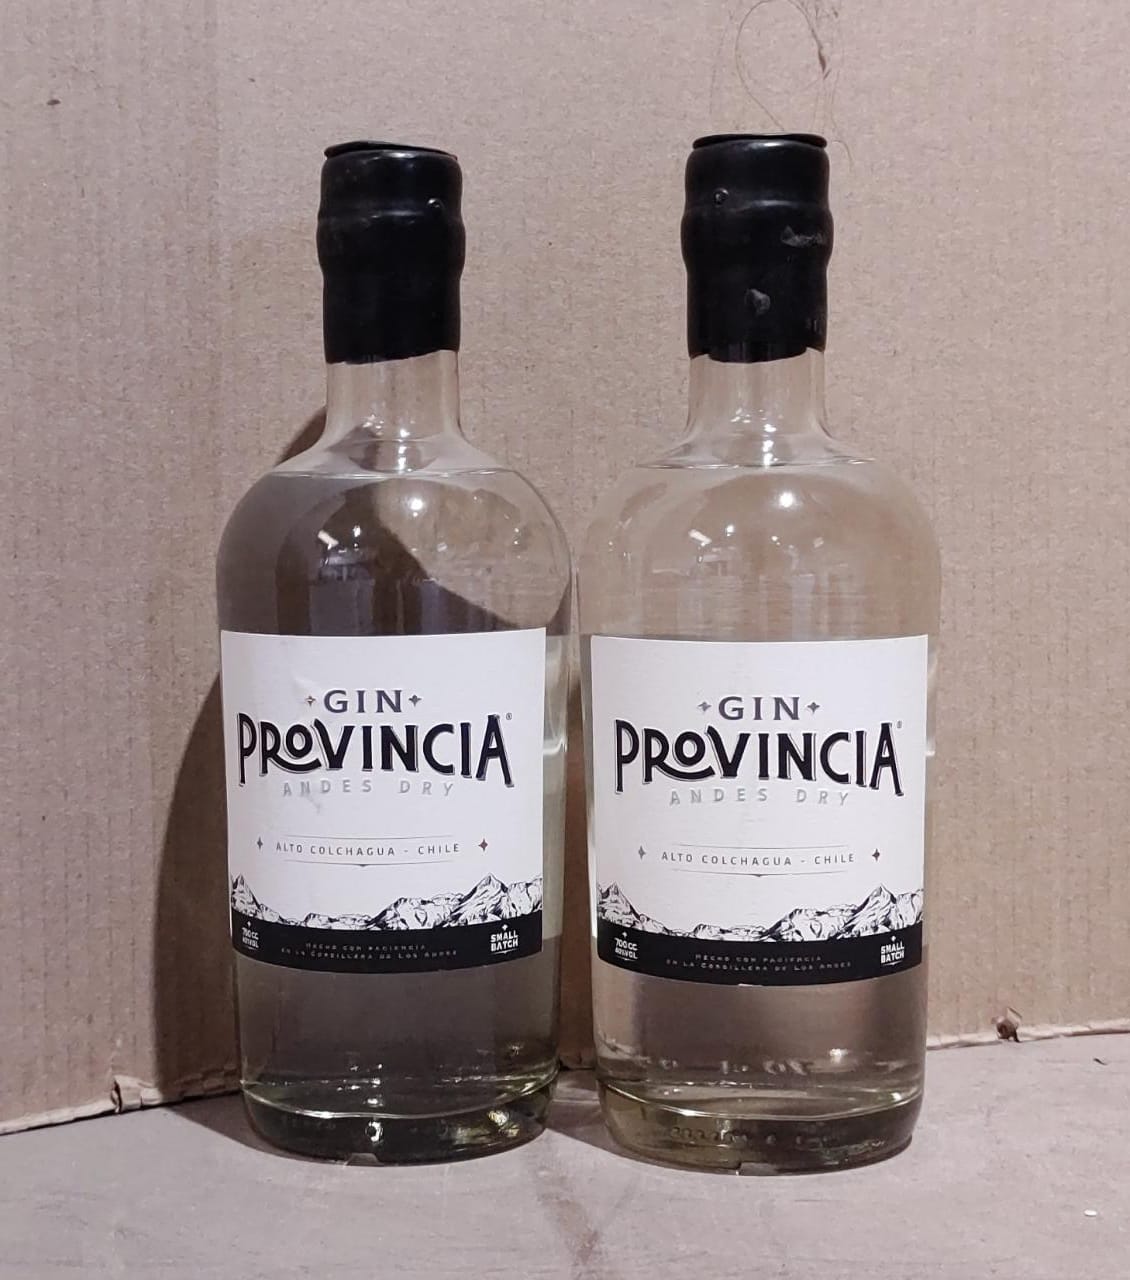 Pack gin provincia andes dry valle colchagua 700ml [Openbox]